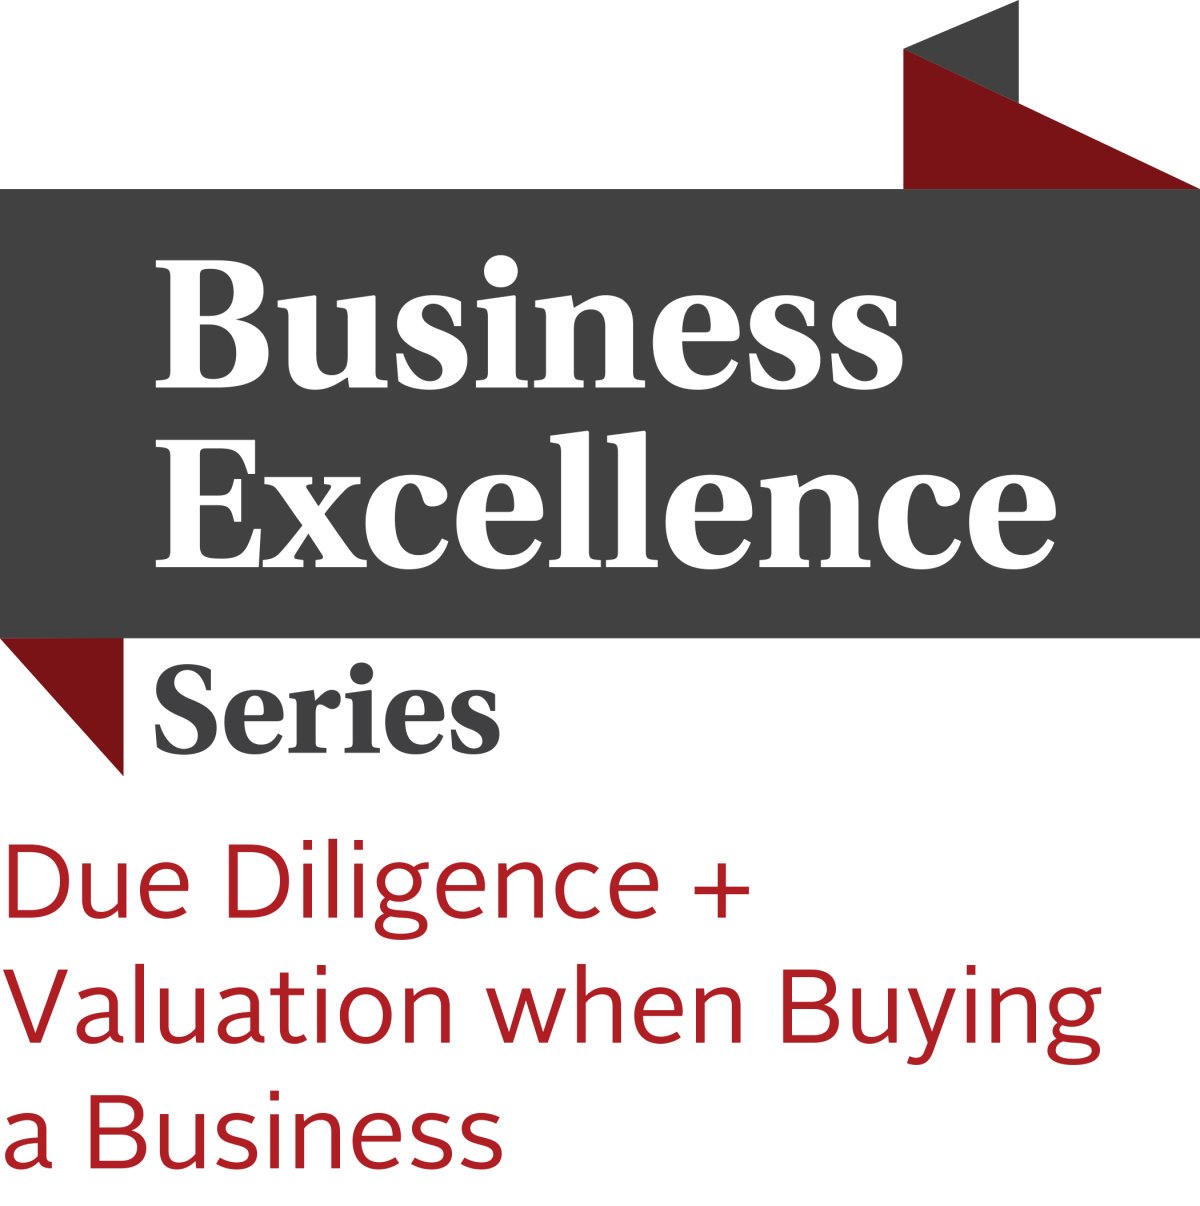 Business Excellence Series: Due Diligence & Valuation when Buying a Business - image